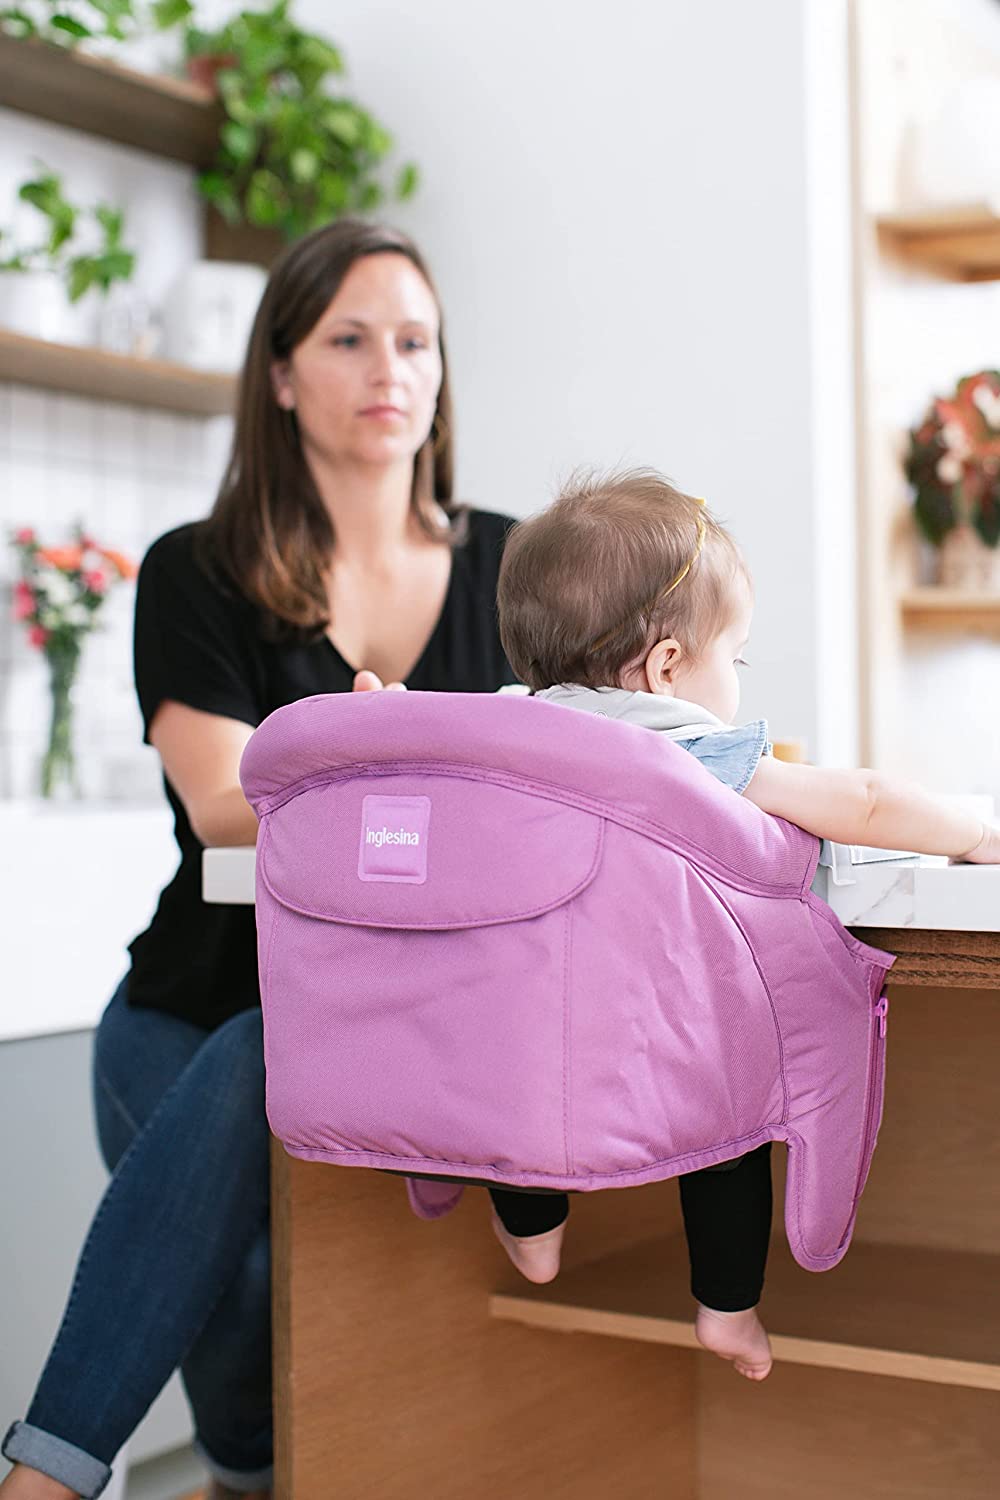 https://bigbigmart.com/wp-content/uploads/2023/05/Inglesina-Fast-Table-Chair-Hook-On-Portable-High-Chair-for-Babies-and-Toddlers-Damage-Free-Travel-Booster-Seat-for-Restaurant-Use-Fuchsia-Pink5.jpg